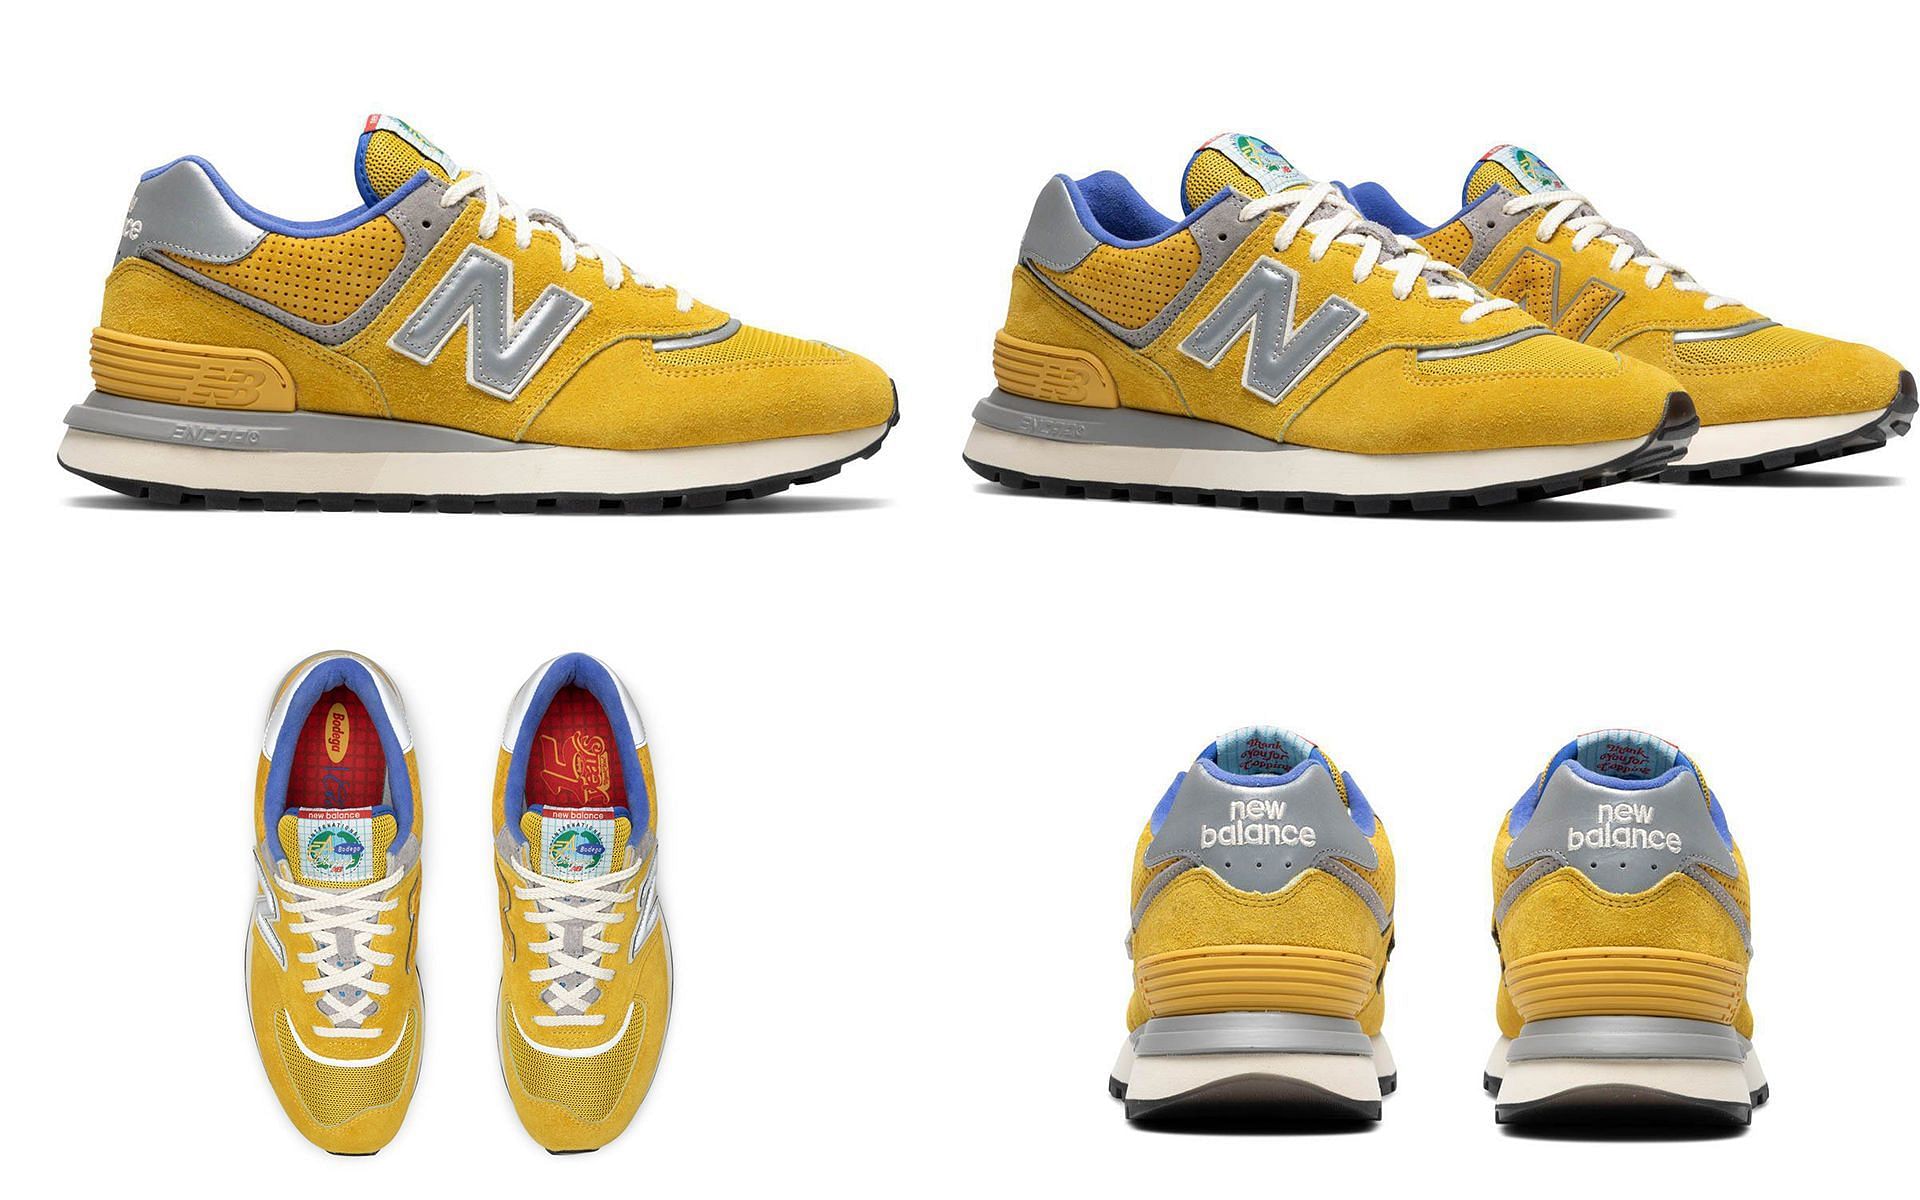 Take a detailed look at the impending Bodega x New Balance 574 Arrival colorway (Image via Sportskeeda)